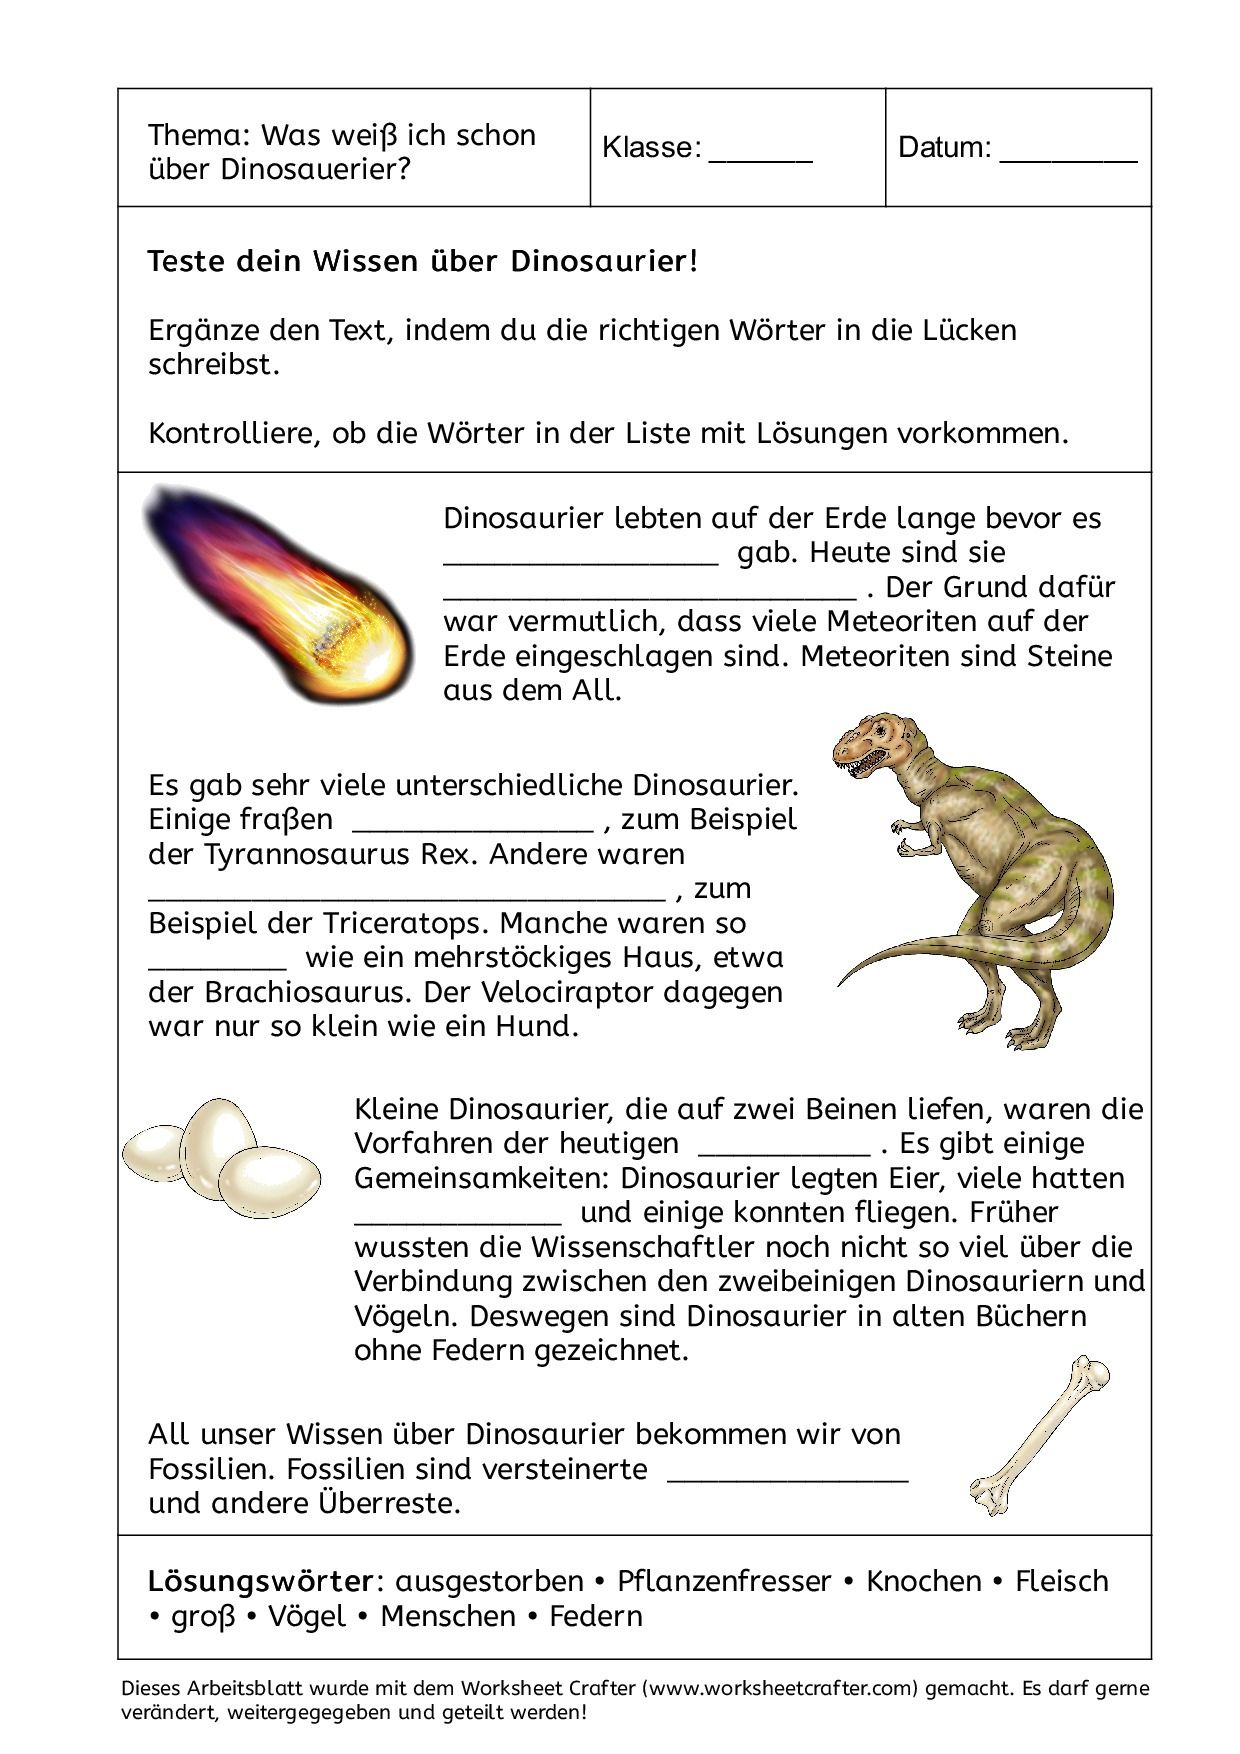 Worksheet Crafter With Regard To Dinosaurier Grundschule in Dinosaurier Grundschule Arbeitsblätter